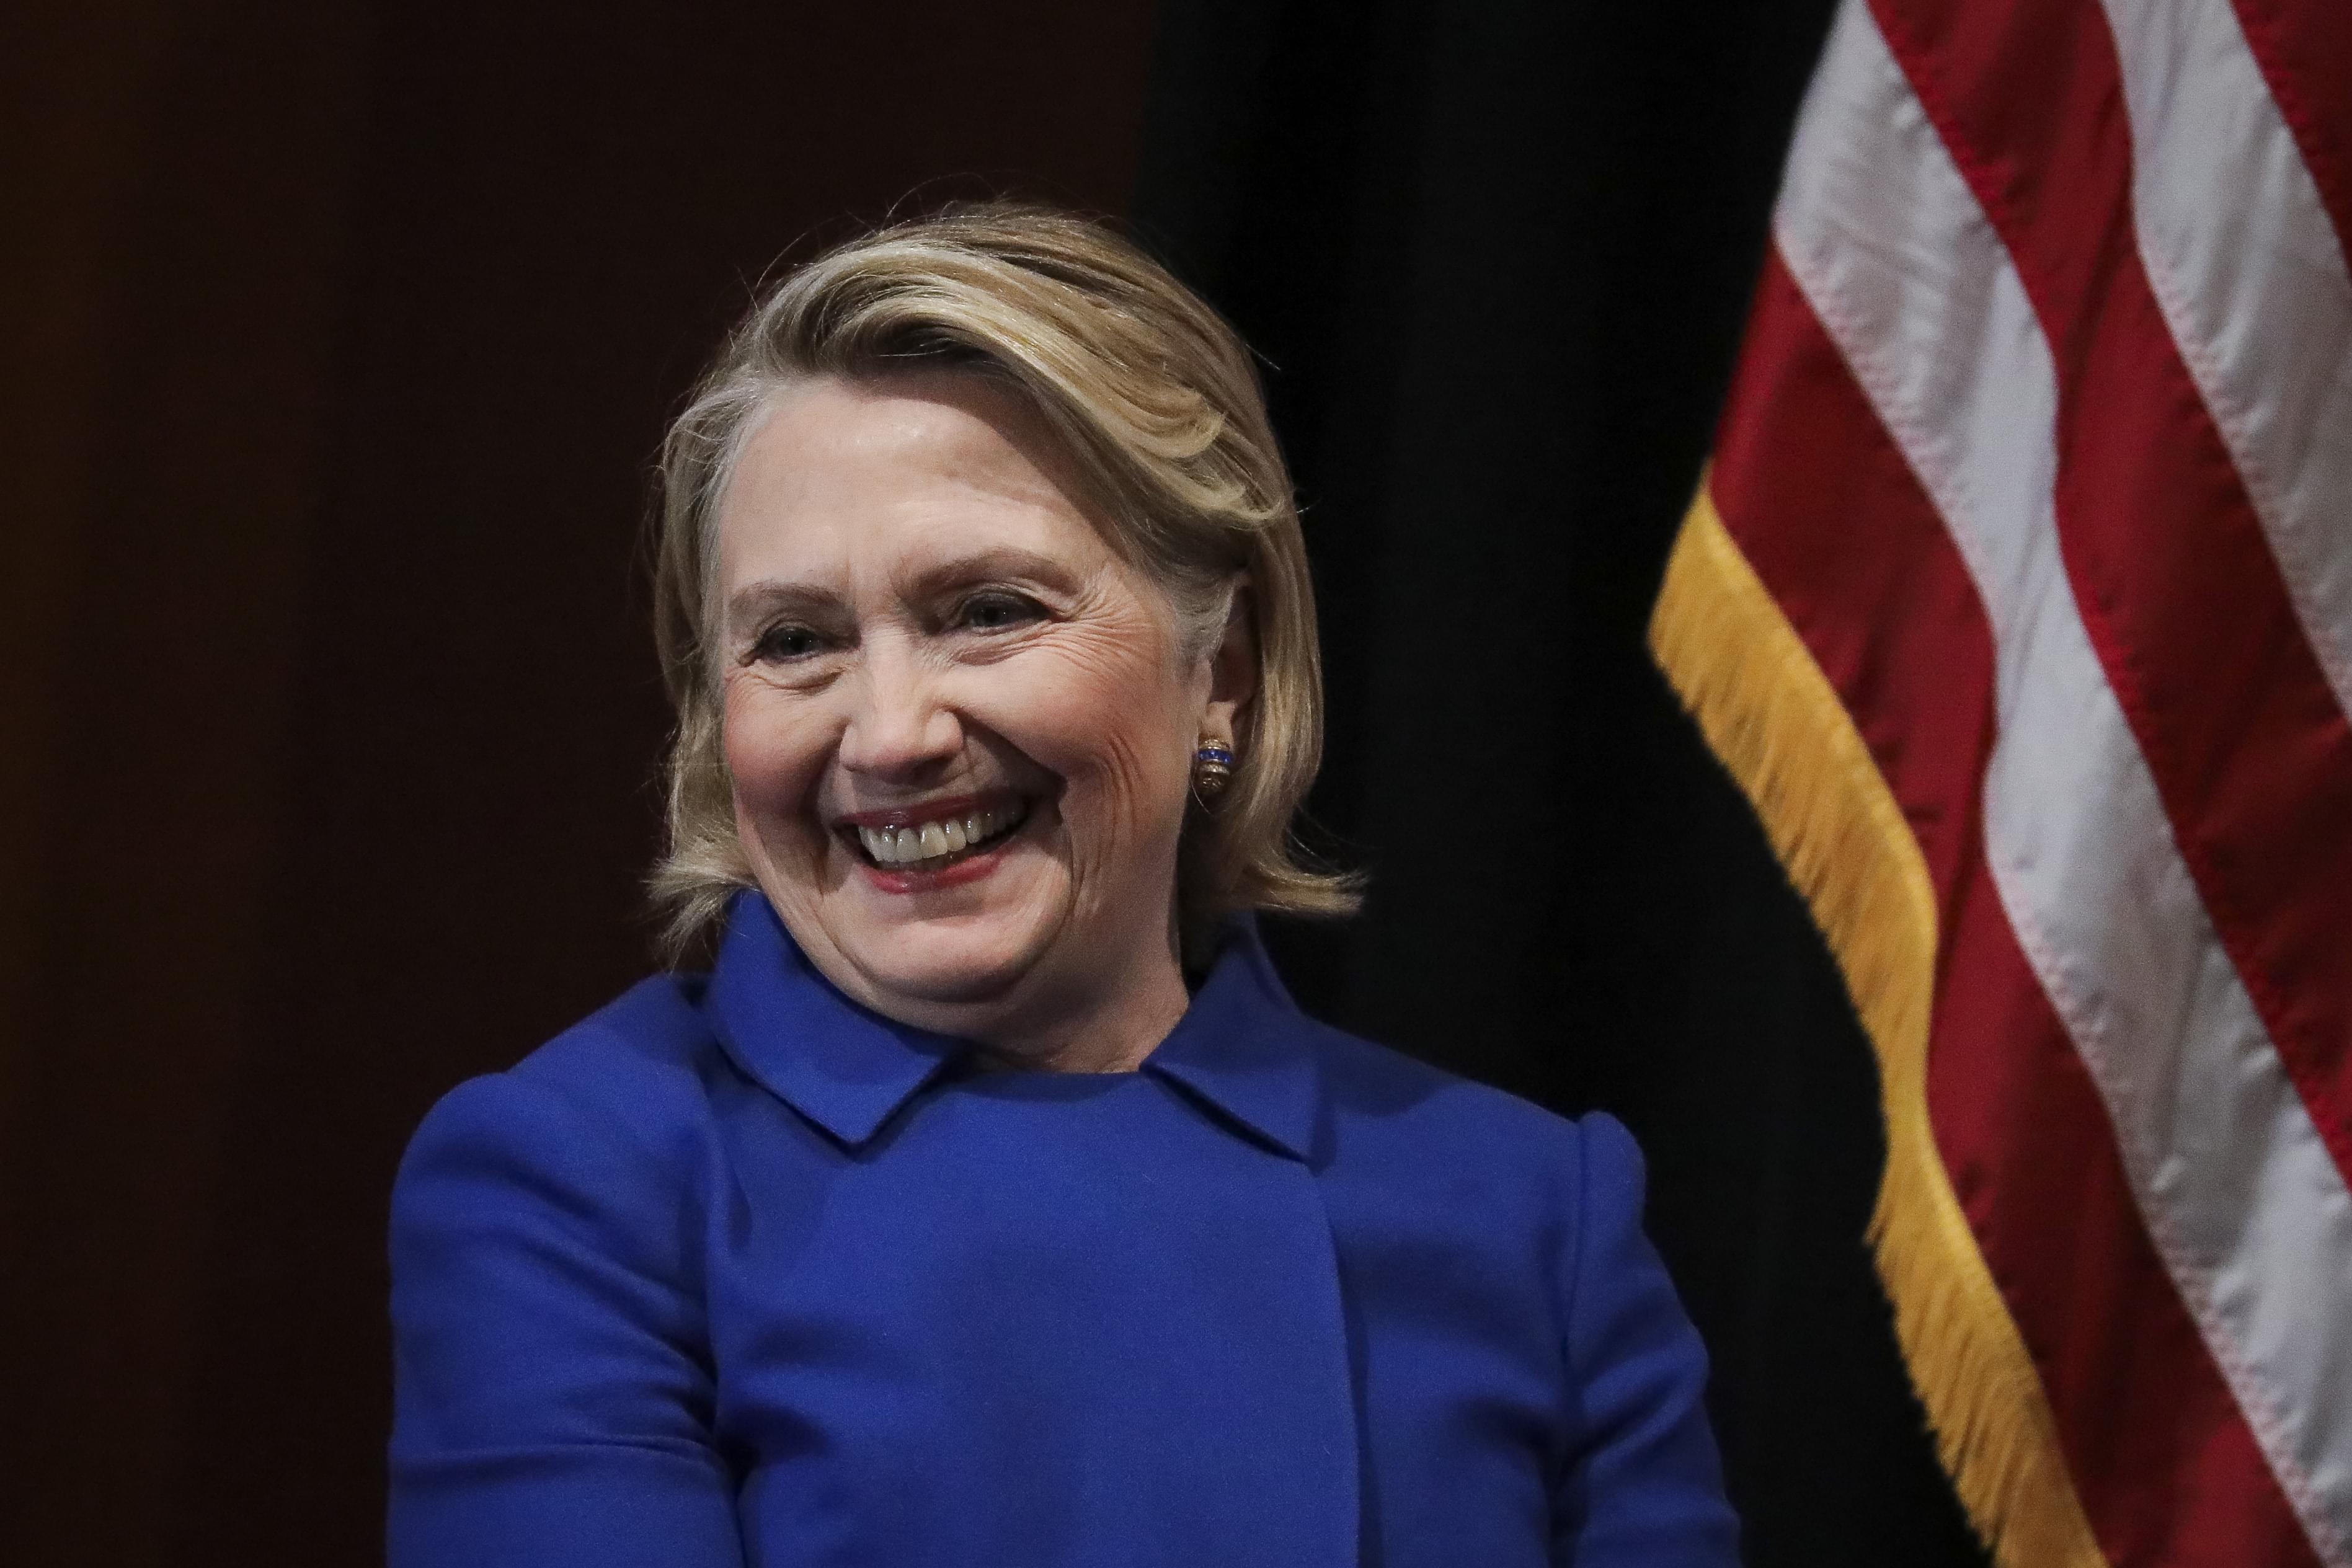 Hillary Clinton To Be In The Running For 2020?!